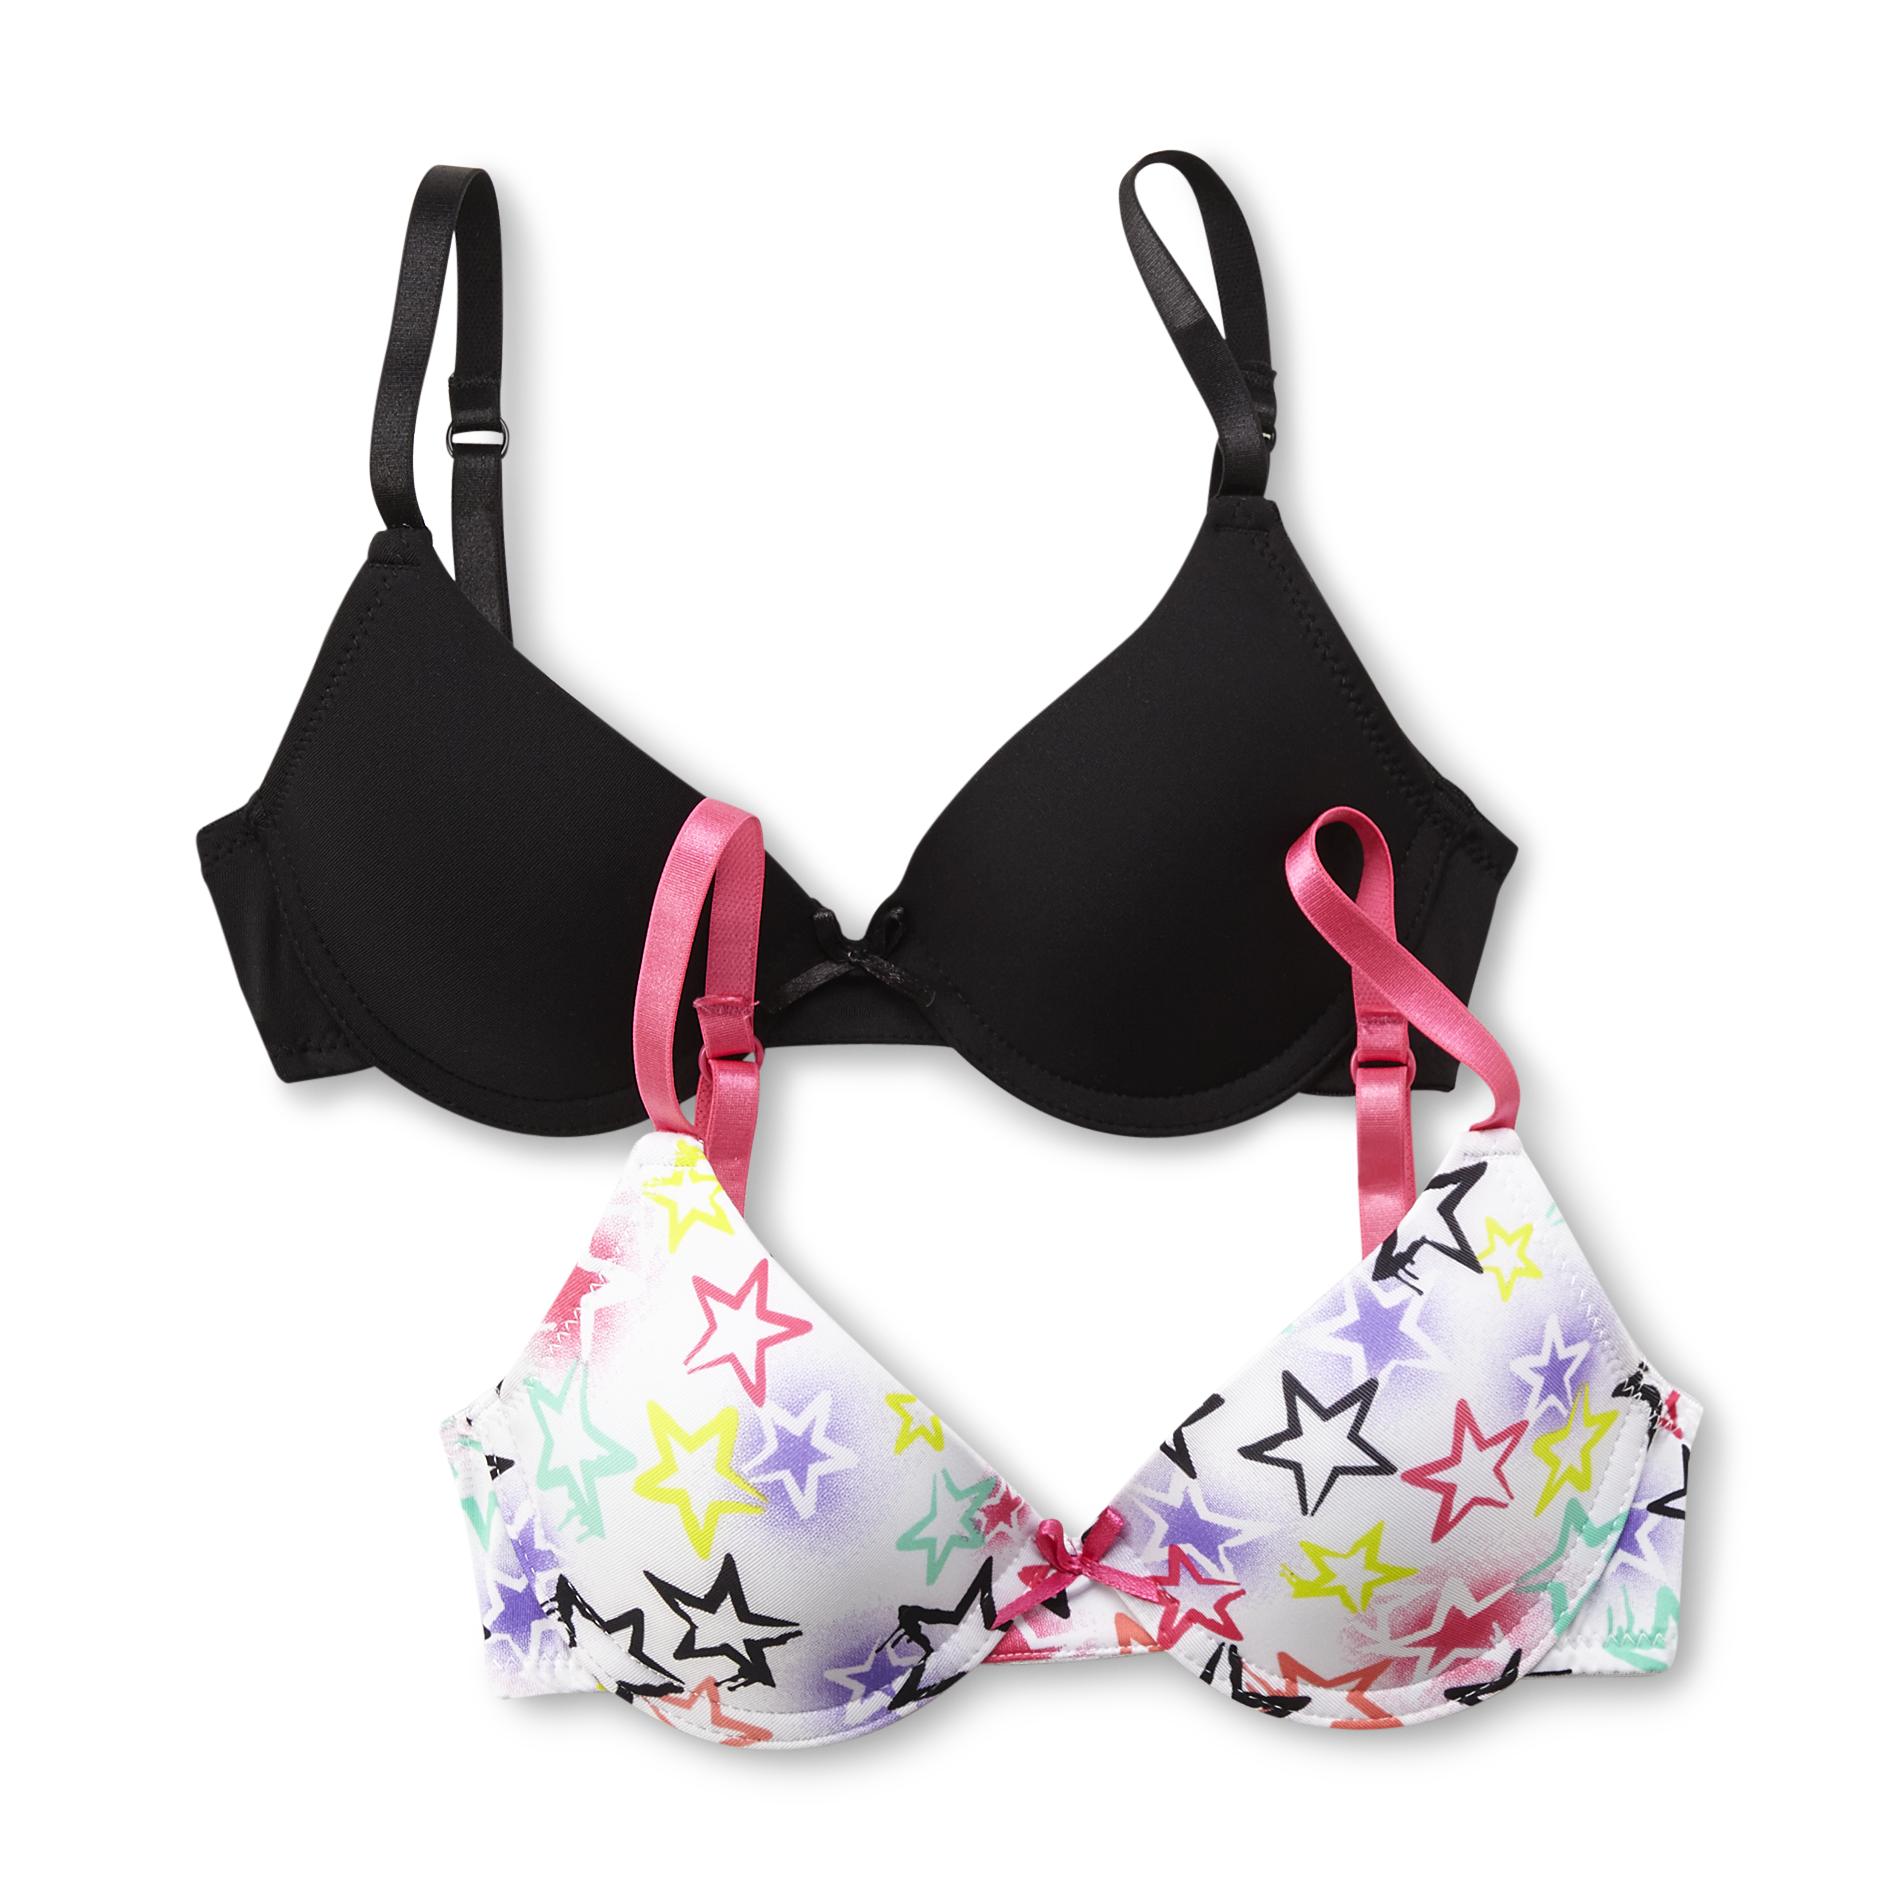 Bongo Girl's 2-Pack Soft Cup Bras - Star